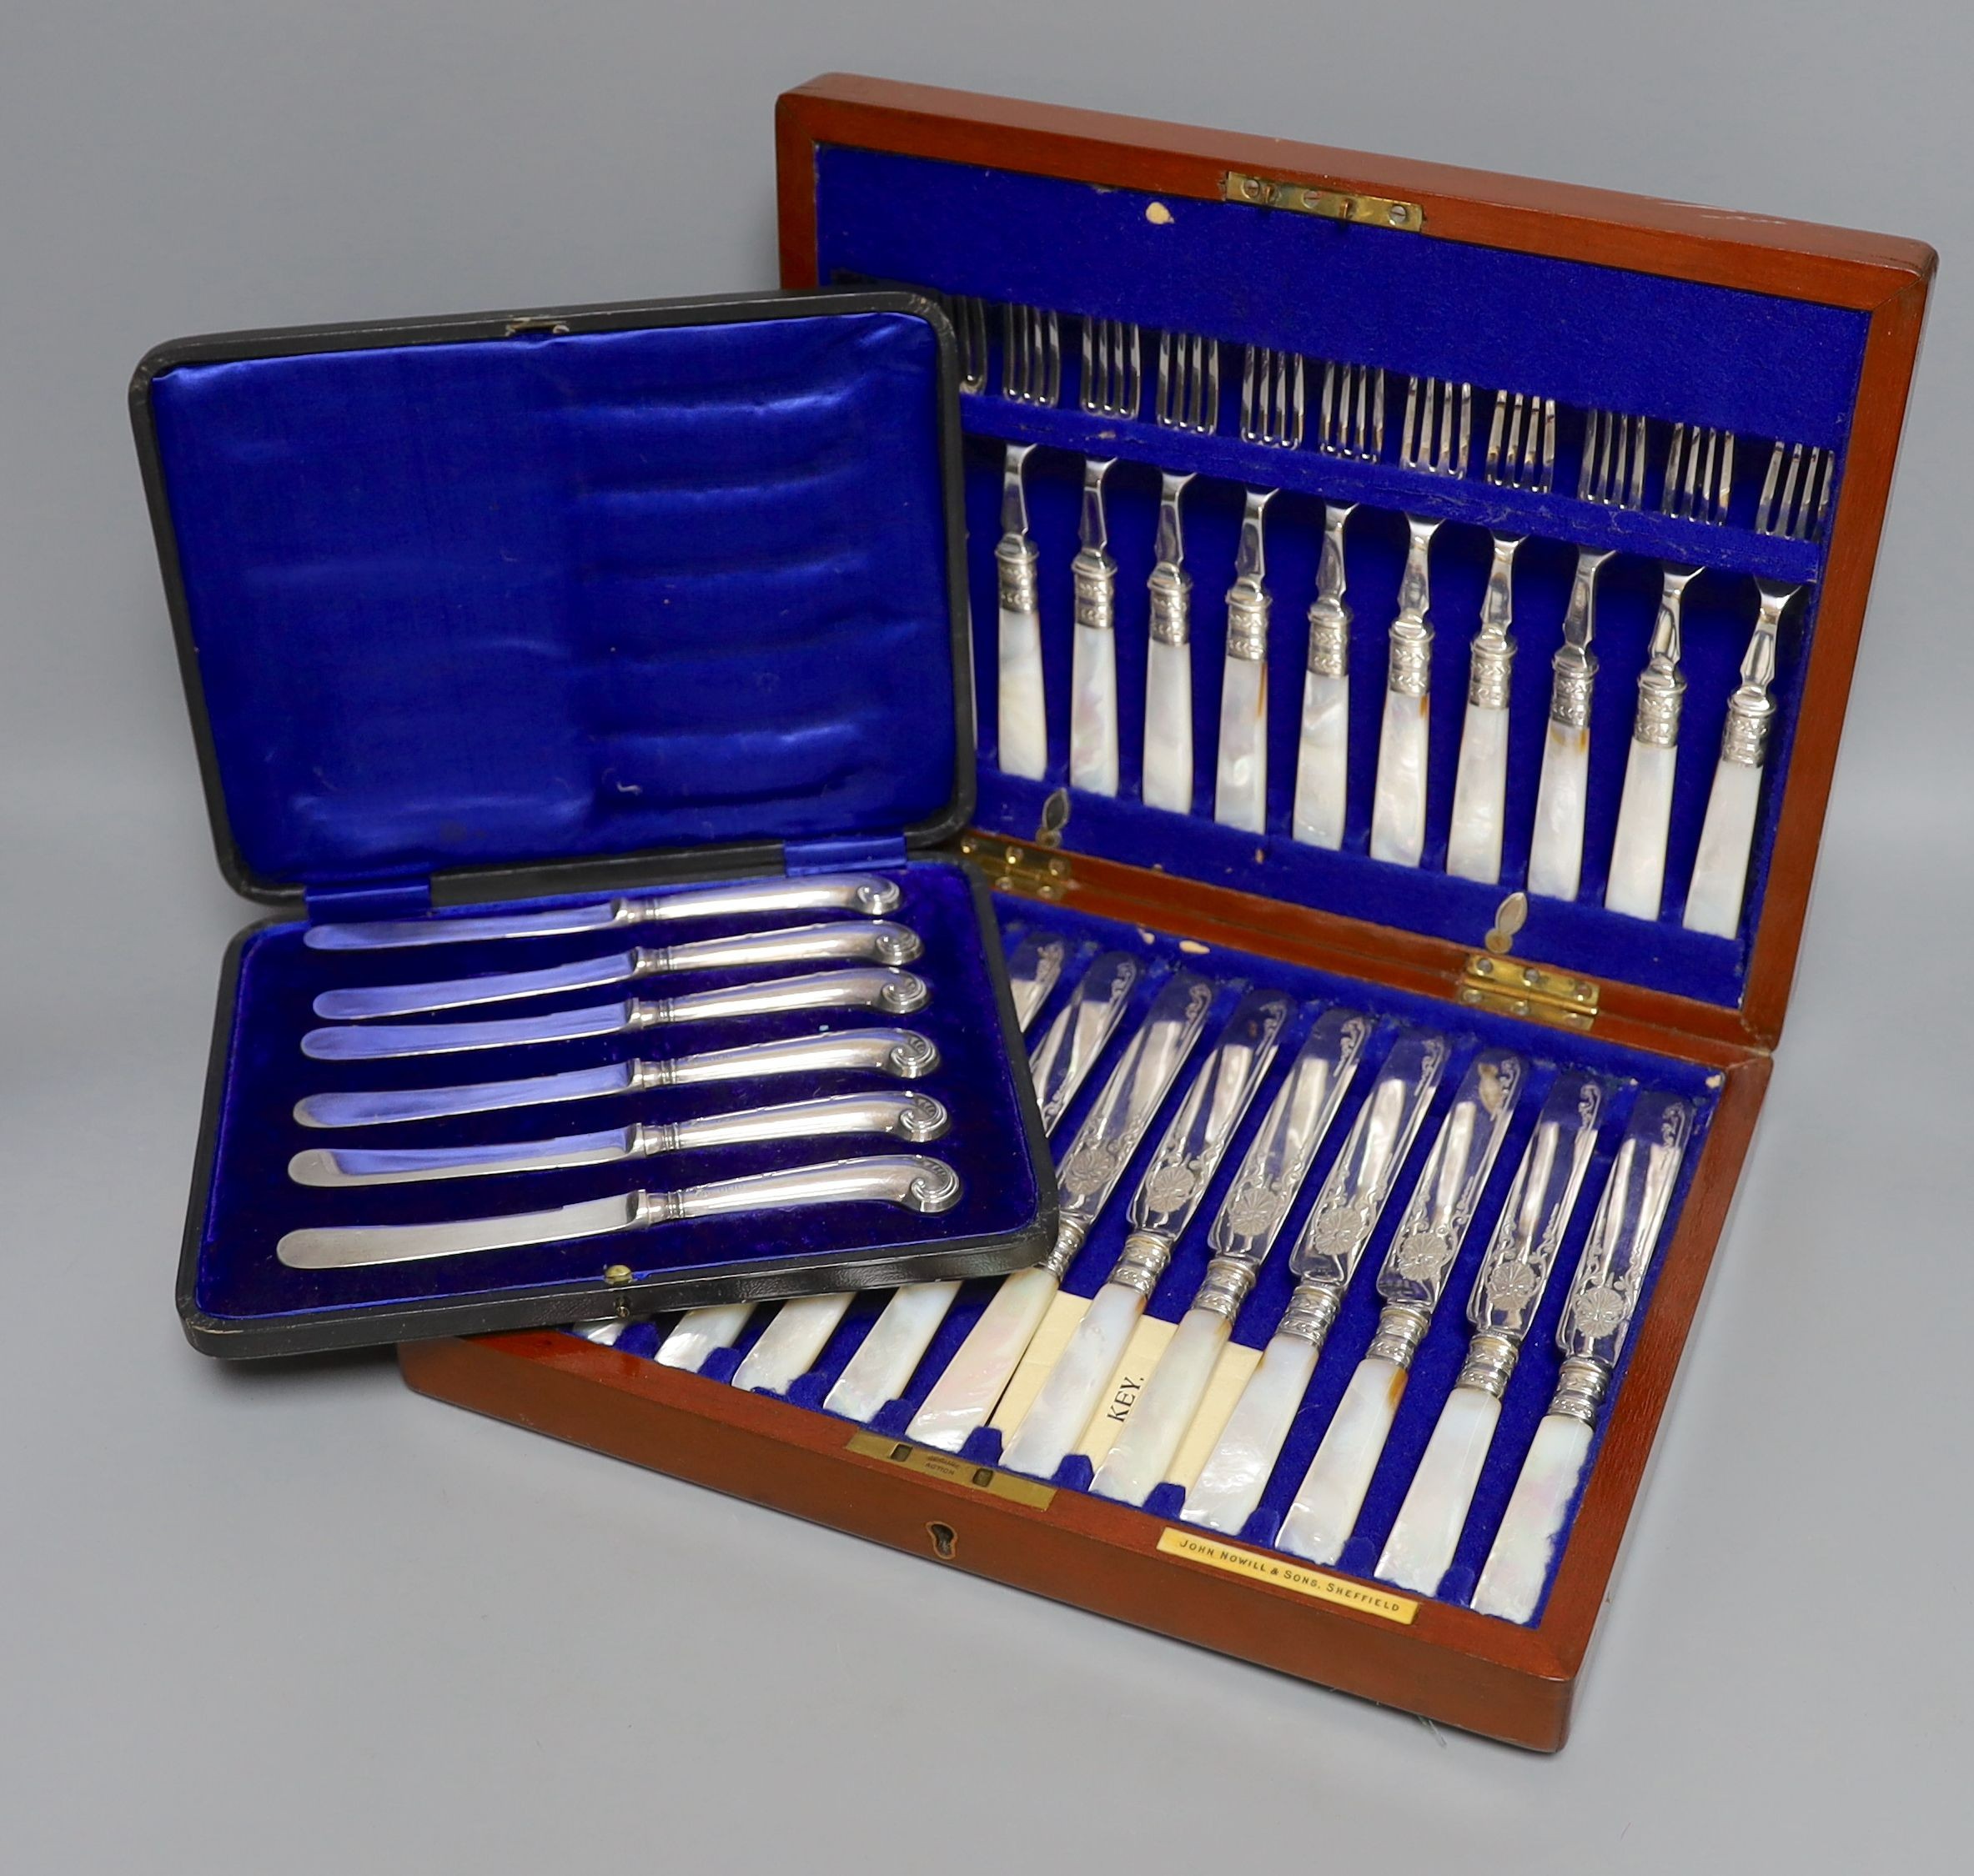 A cased set of silver handled pistol knives and a cased set of mother-of-pearl knives and forks